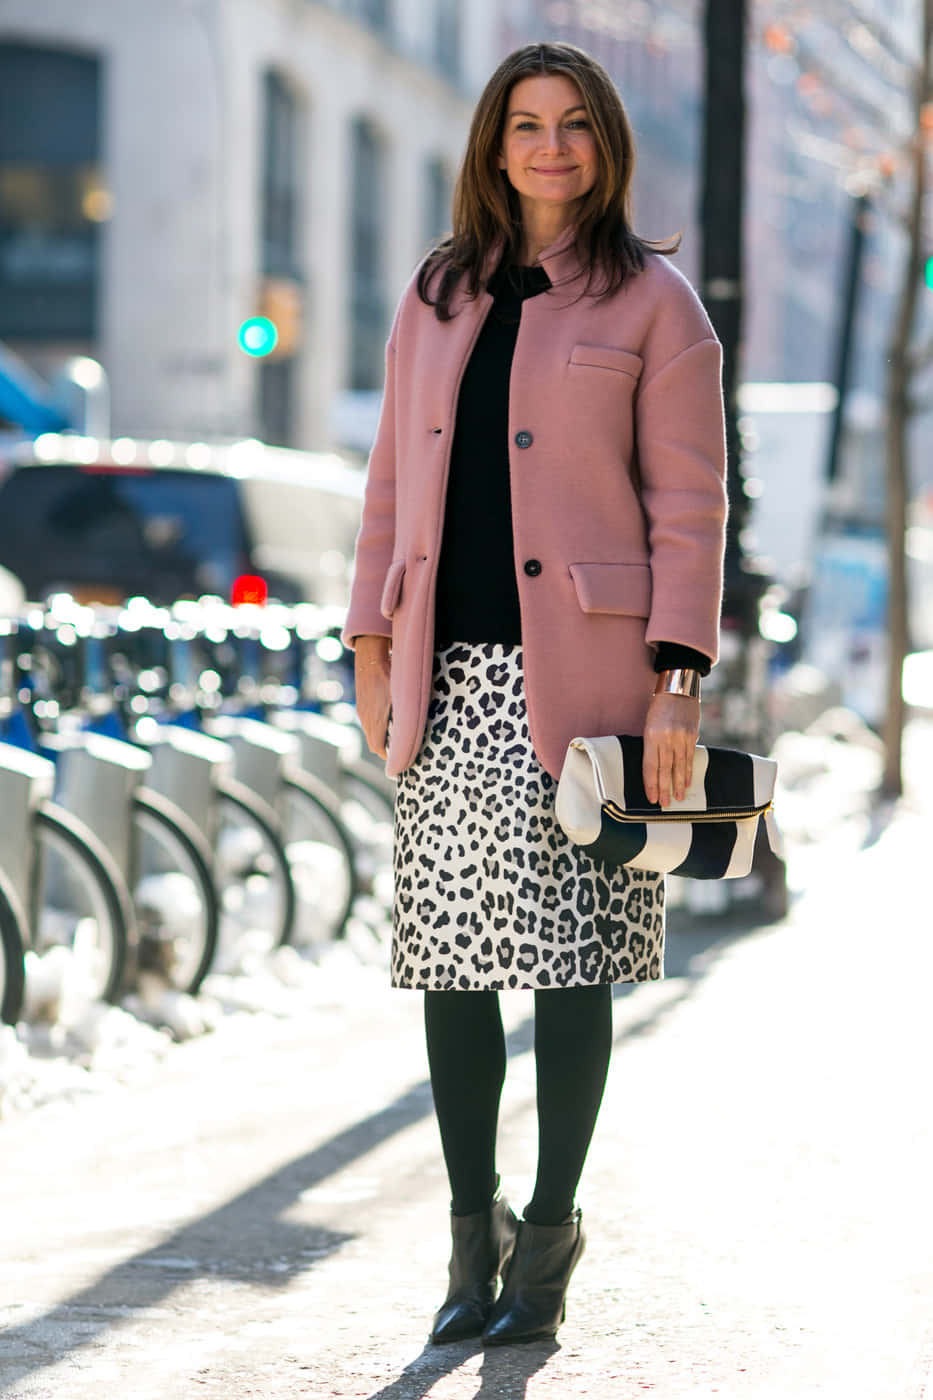 Stylish Pink Coat Outfit Wallpaper